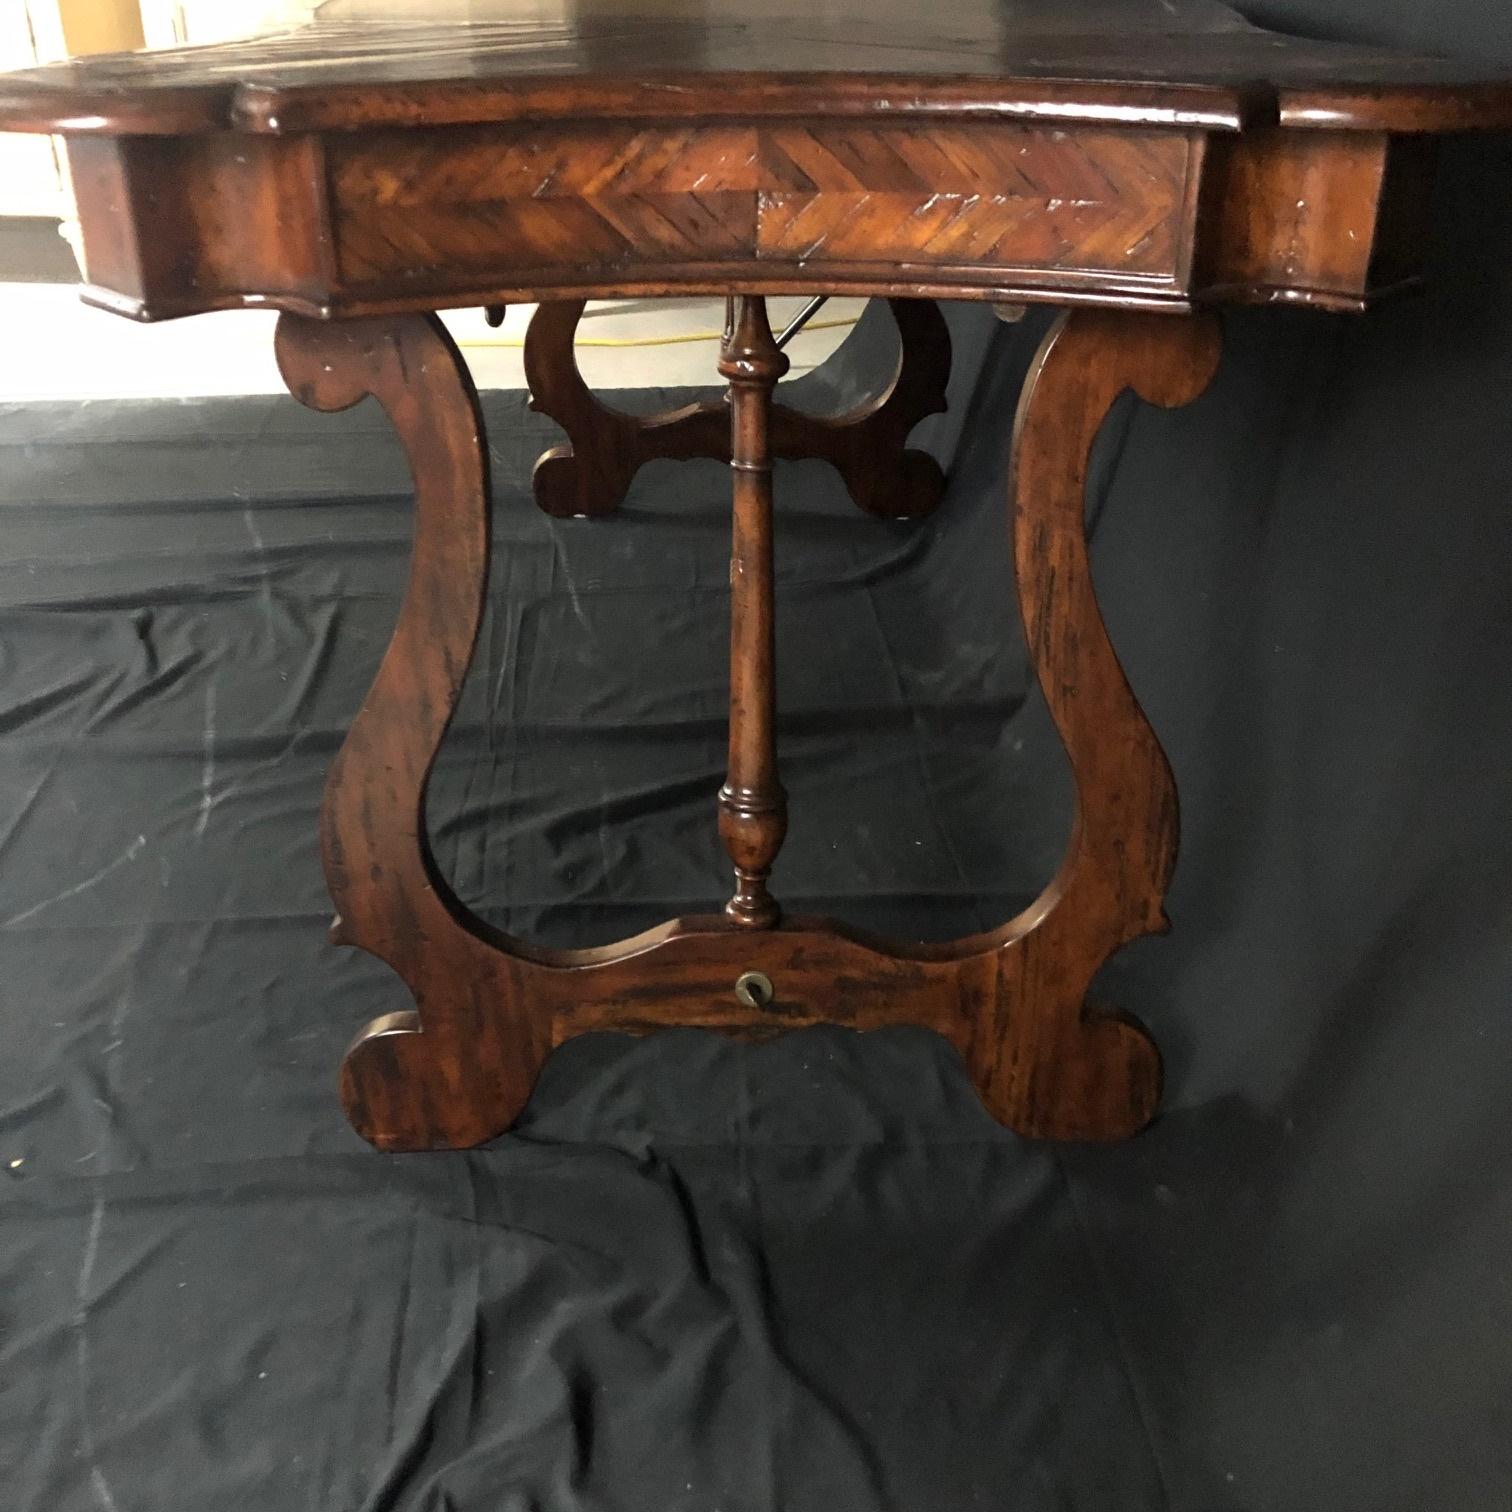 North American Luxurious Theodore Alexander Castle Bromwich Mahogany & Leather Writing Desk